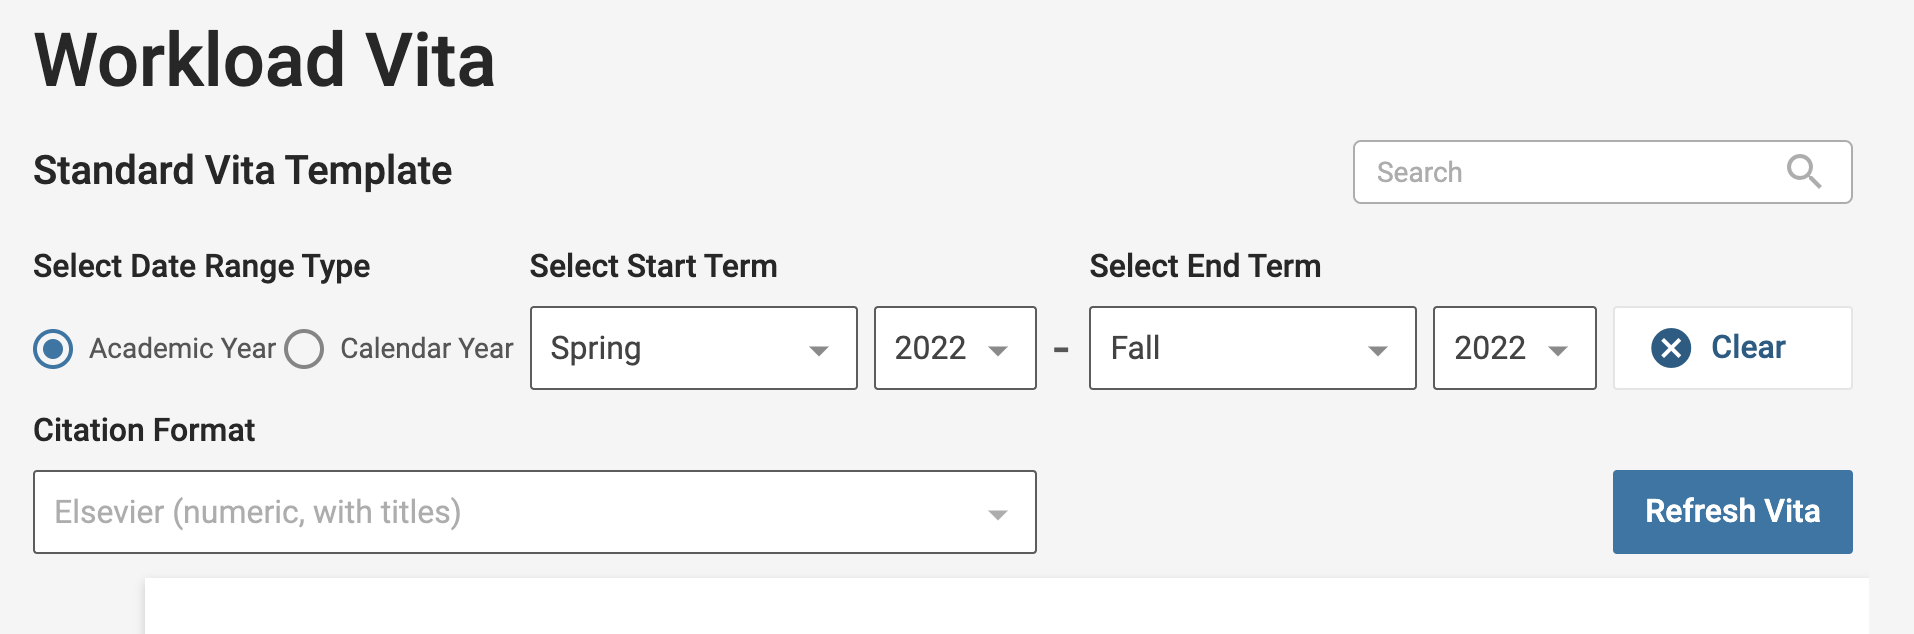 Workload Vita section with Select Date Range Type, Start Term, End Term, and Citation Format fields below